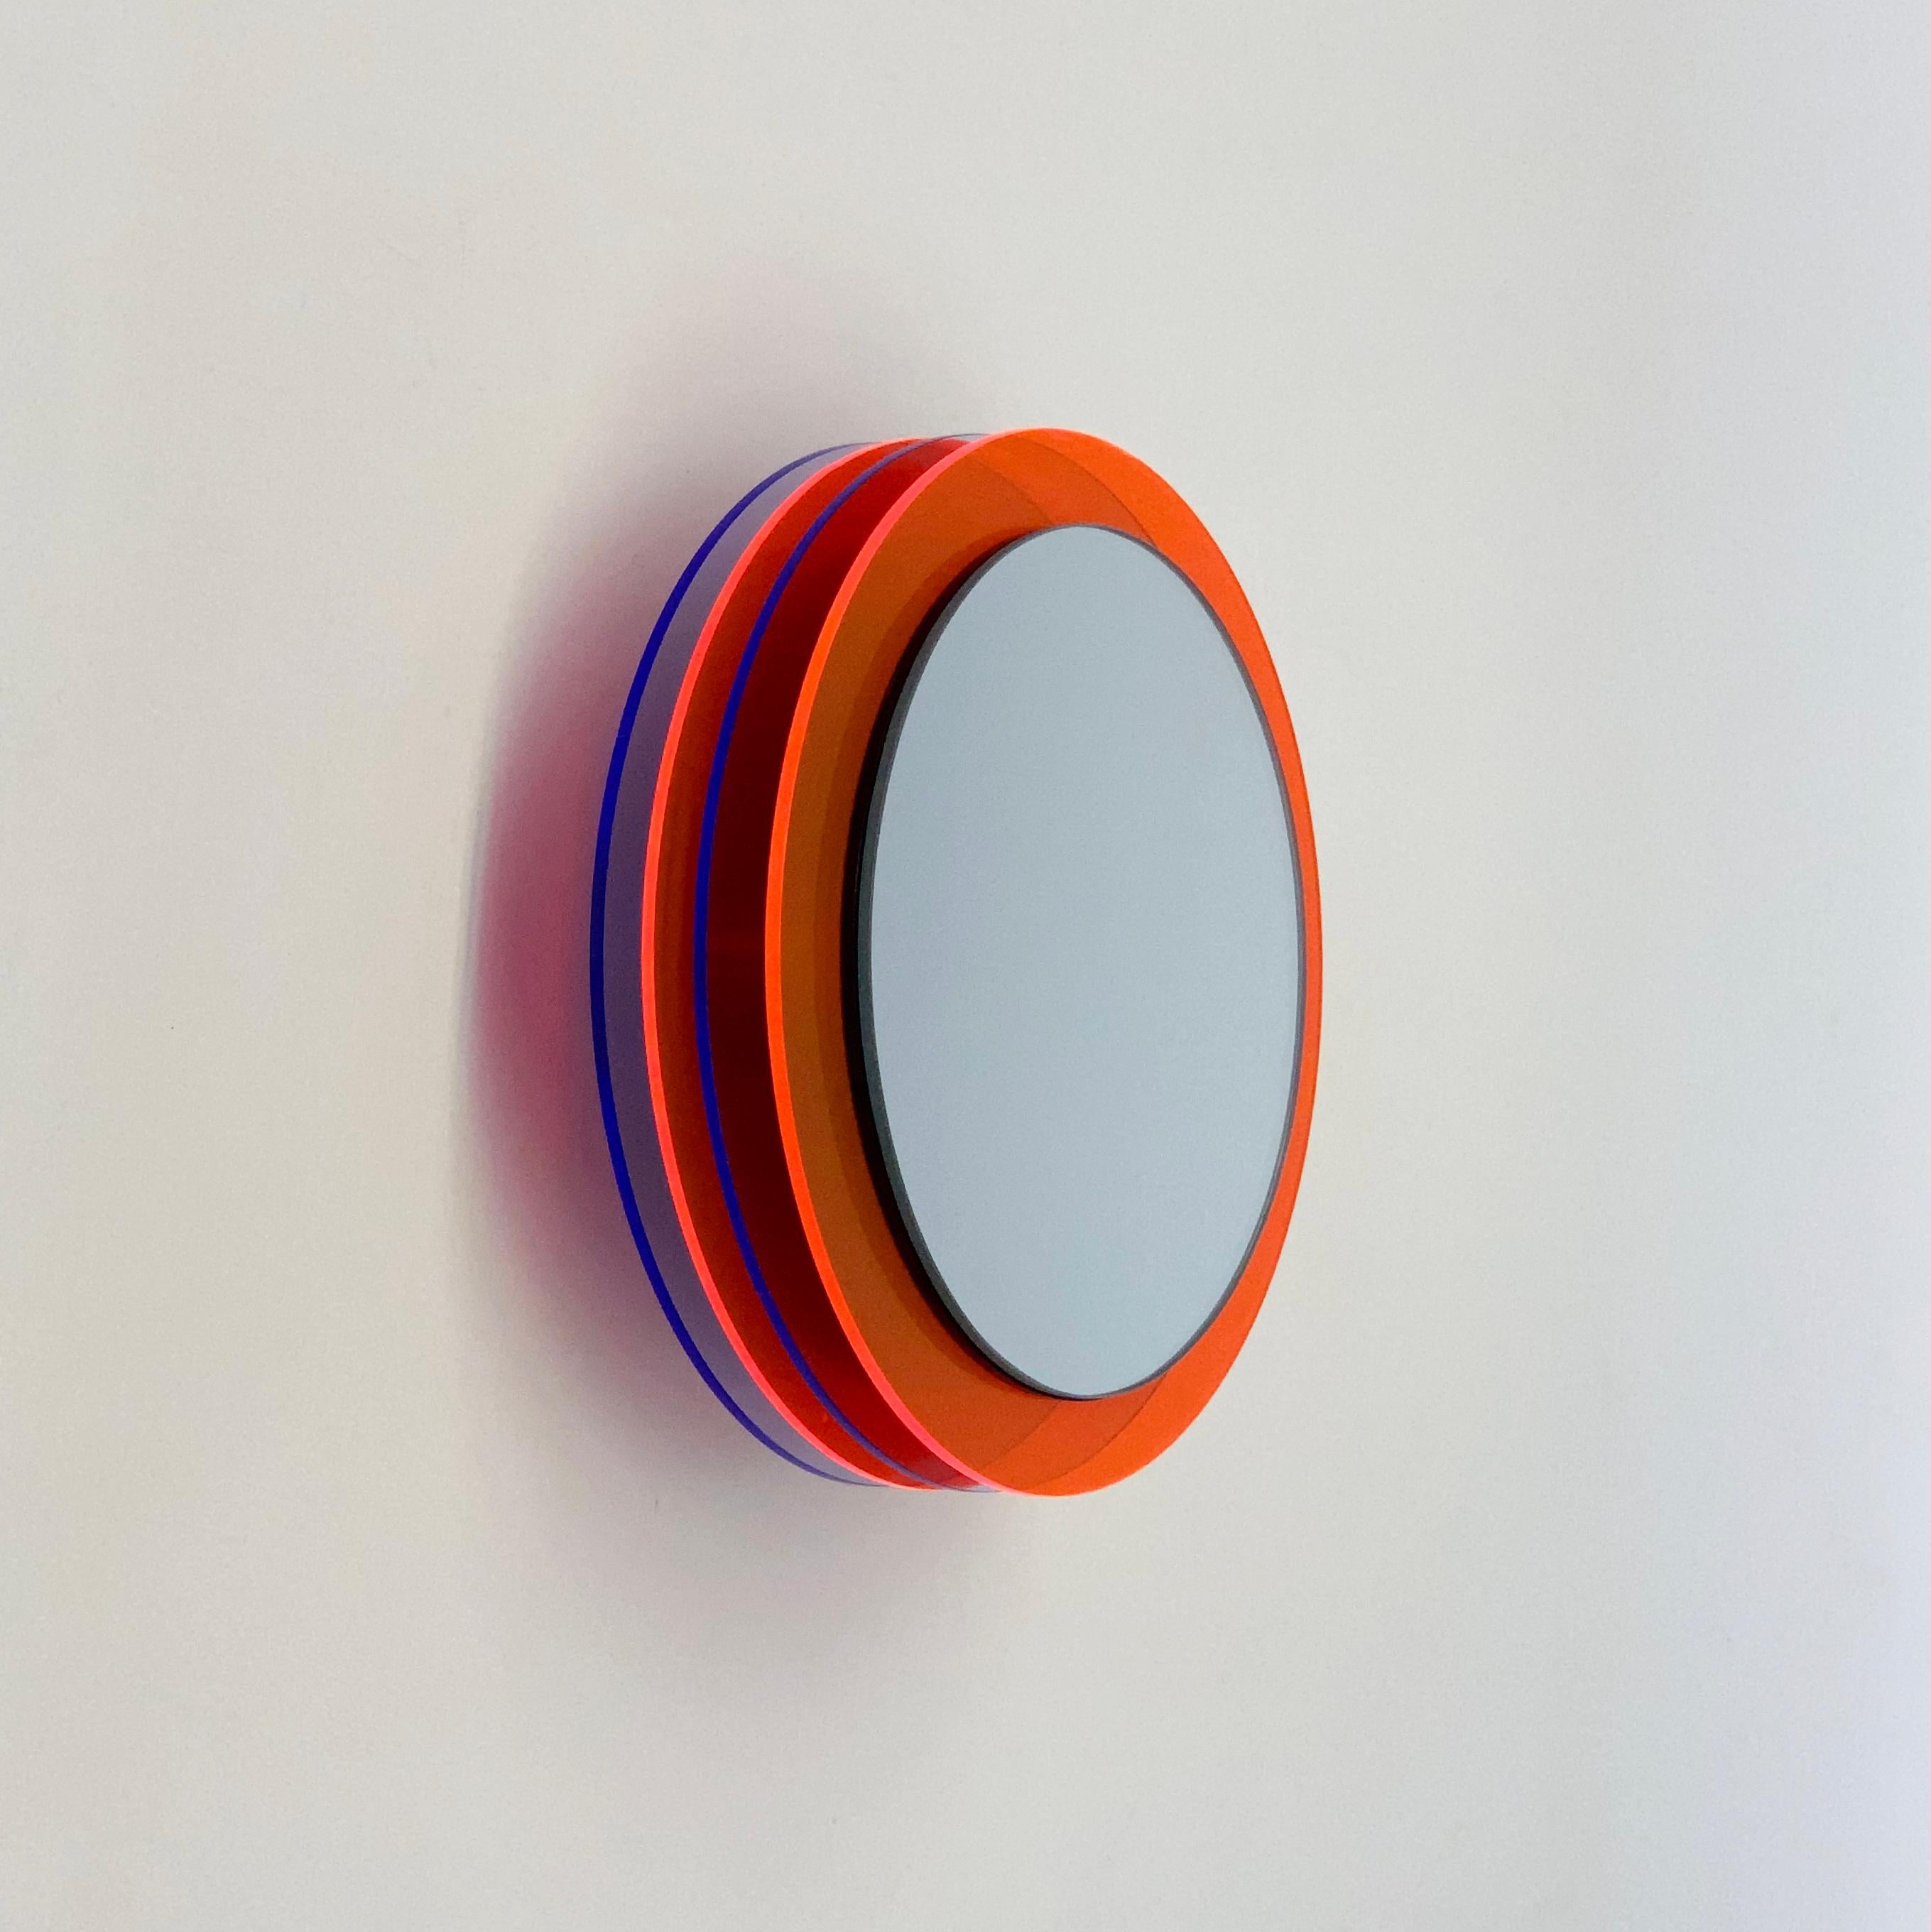 Contemporary Daddy - wall mirror with plexiglass, design sculpture by Andreas Berlin